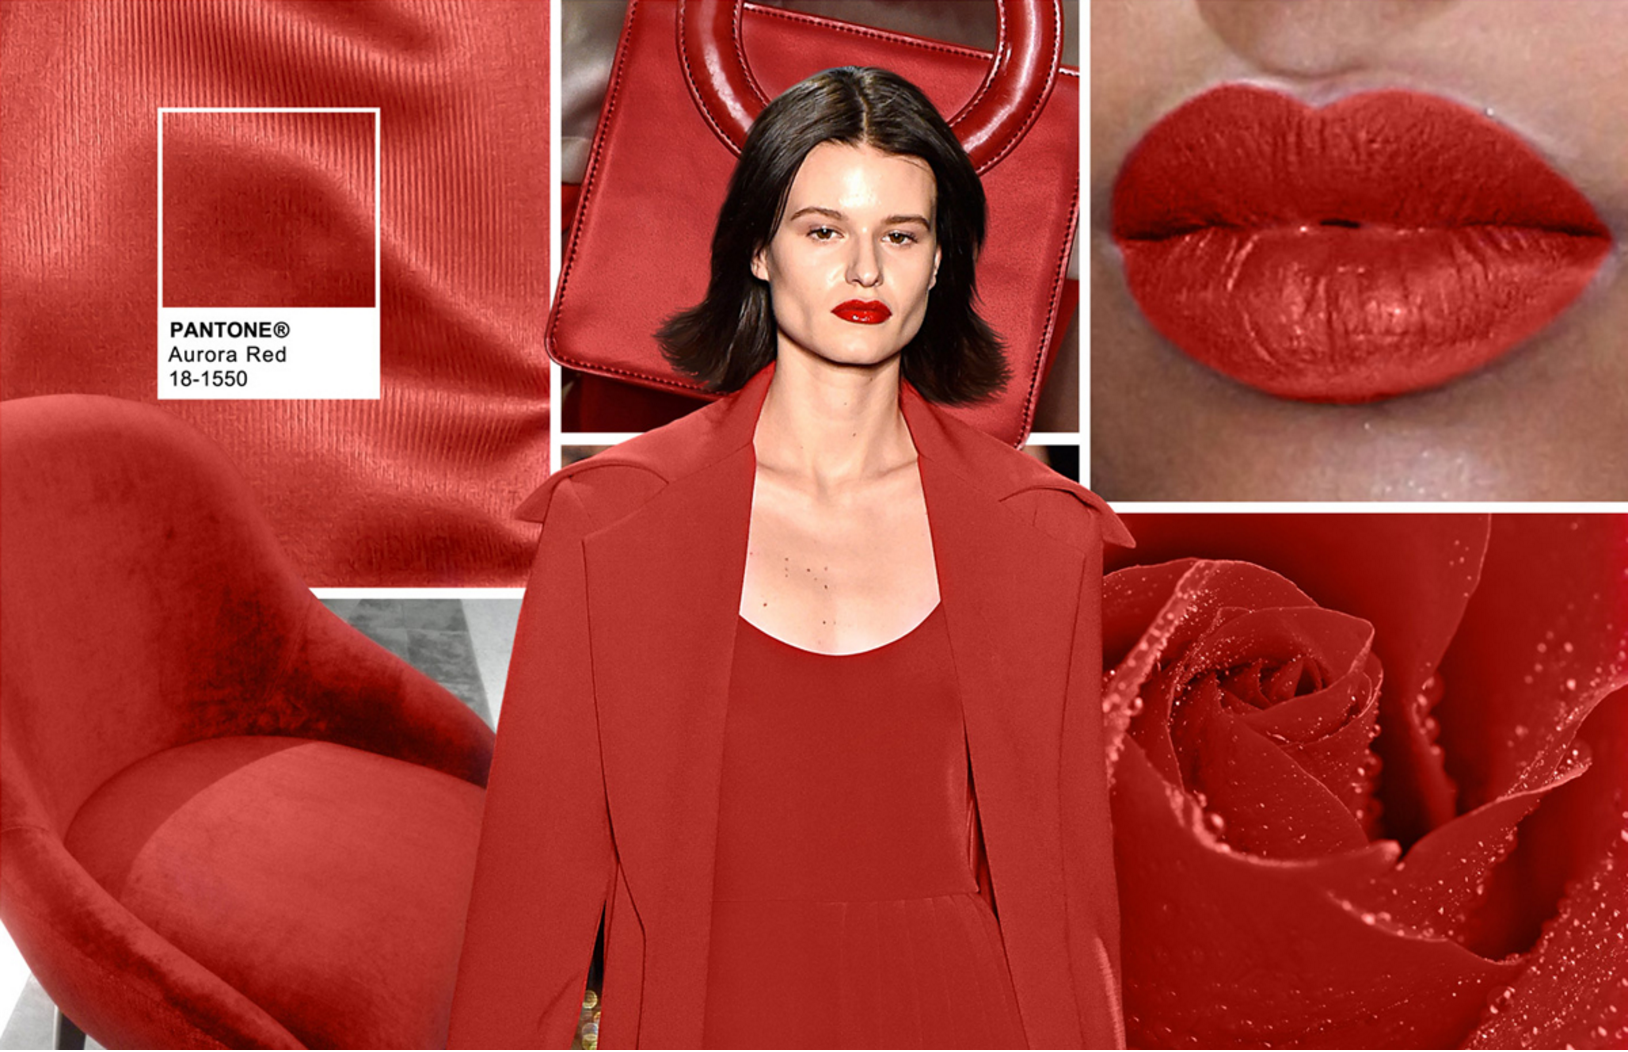 Photo Source: Pantone Color Institute / Silk: Barbara Casasola Bag: Opening Ceremony Lips: Fashion Snoops Beauty Rose: Rose in Waterdrops by Gn Om (istock.com/gn_om) Woman: Christian Siriano Chair: Mambo Unlimited